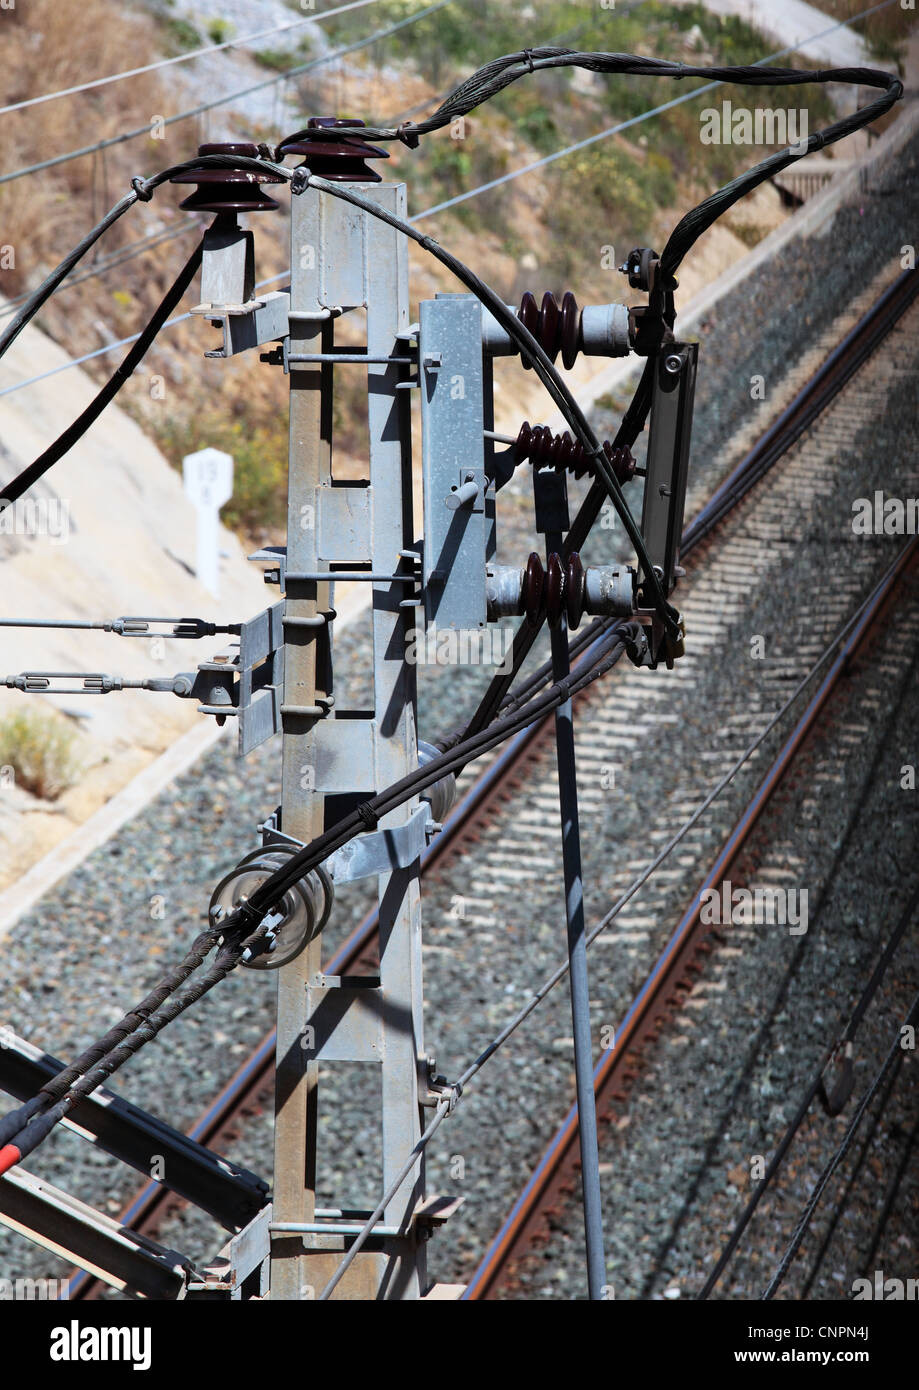 overhead power lines for electric powered train Stock Photo